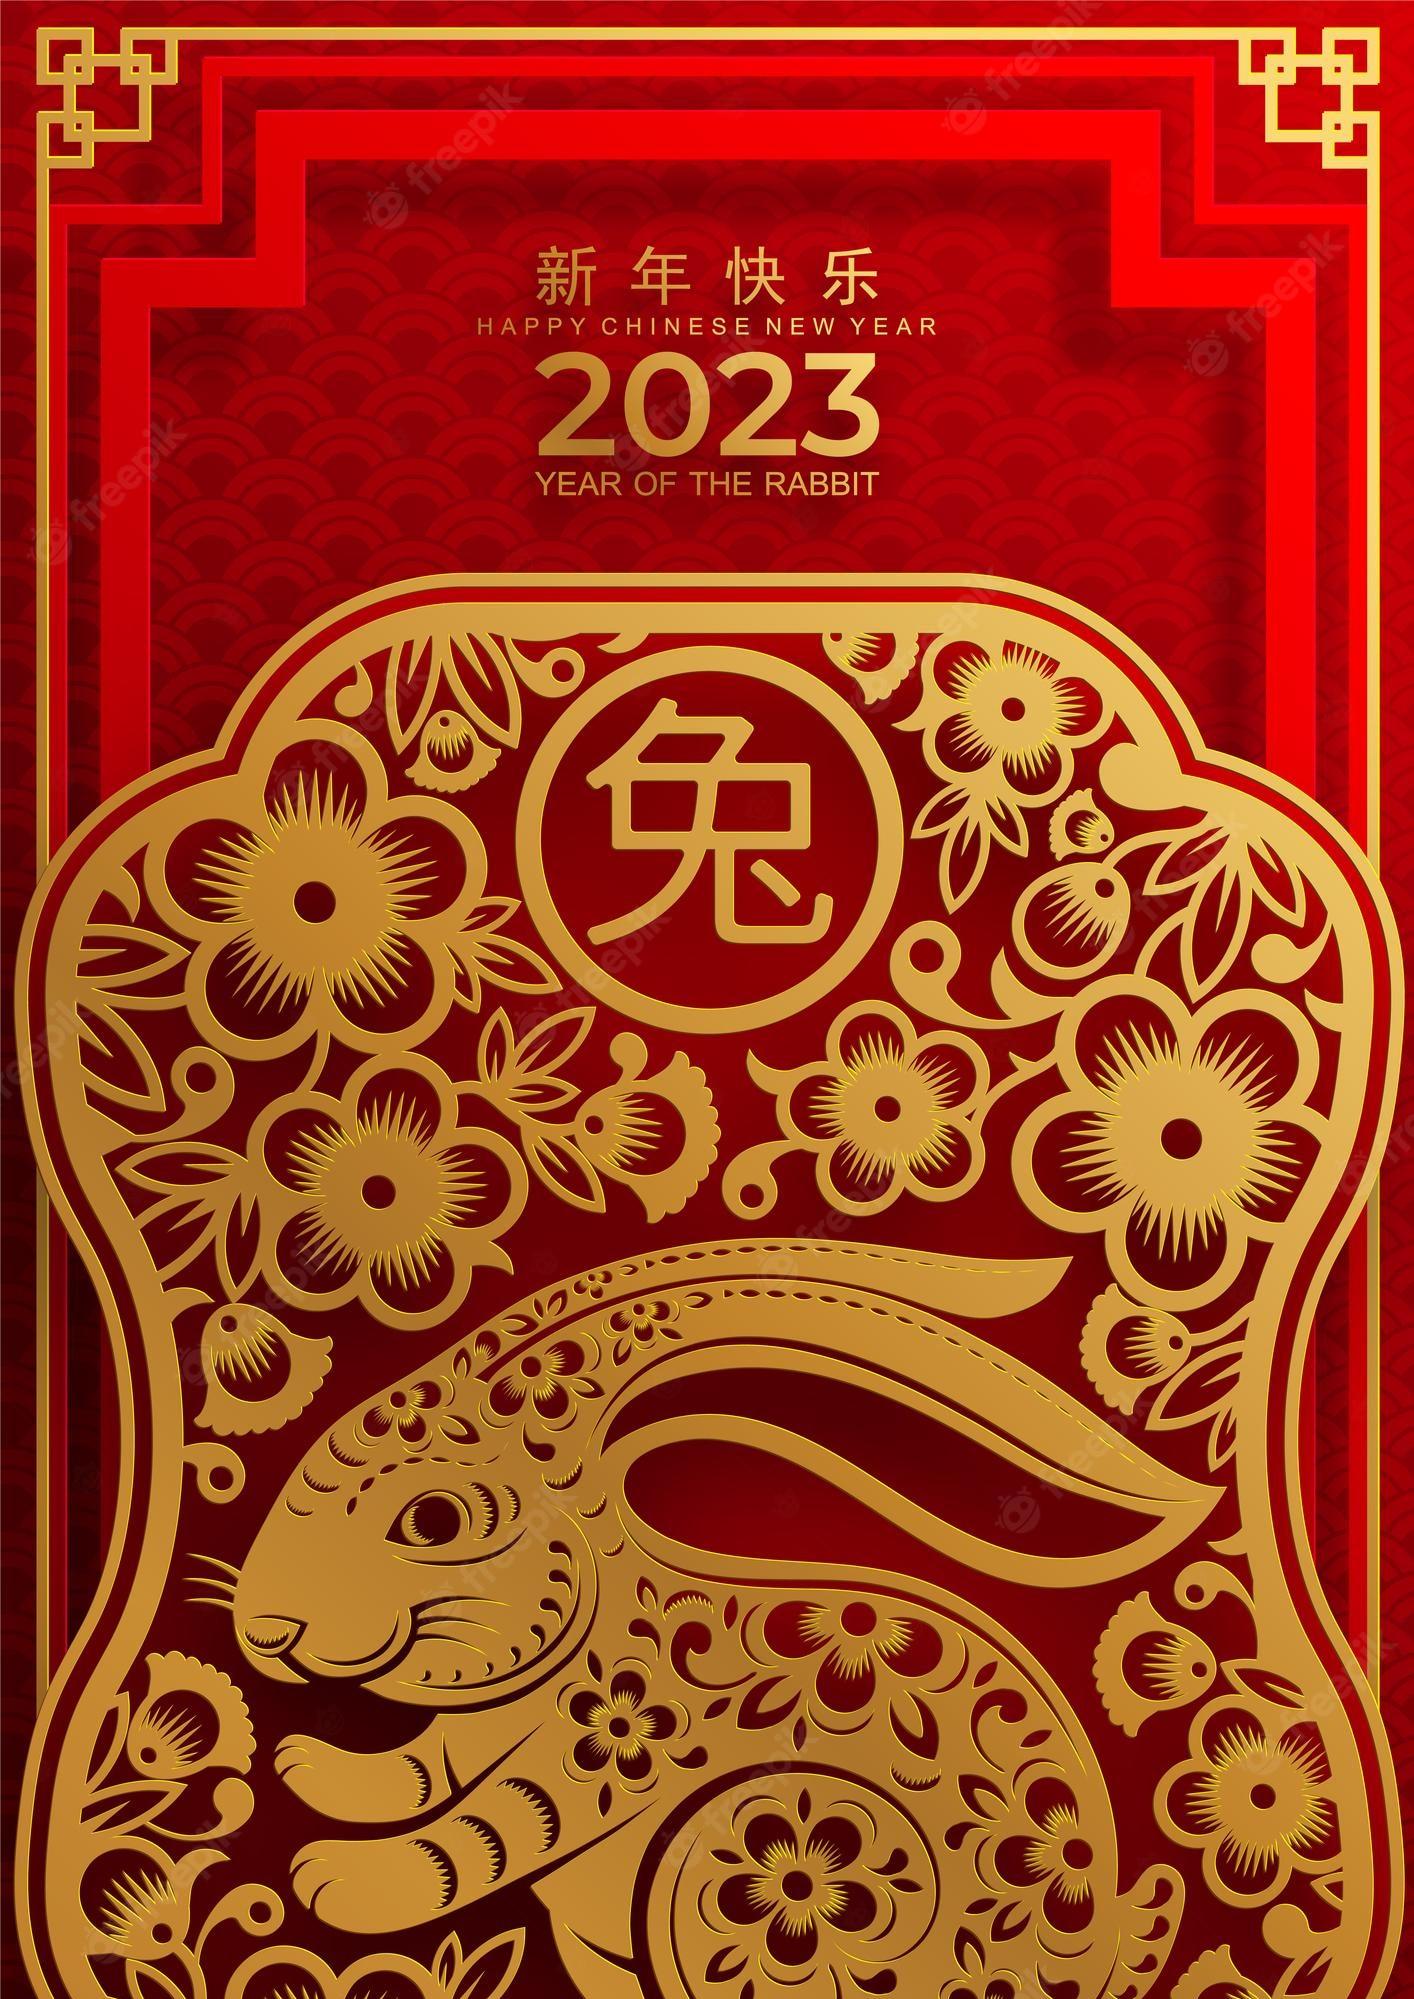 440000 Chinese New Year Images  Chinese New Year Stock Design Images  Free Download  Pikbest